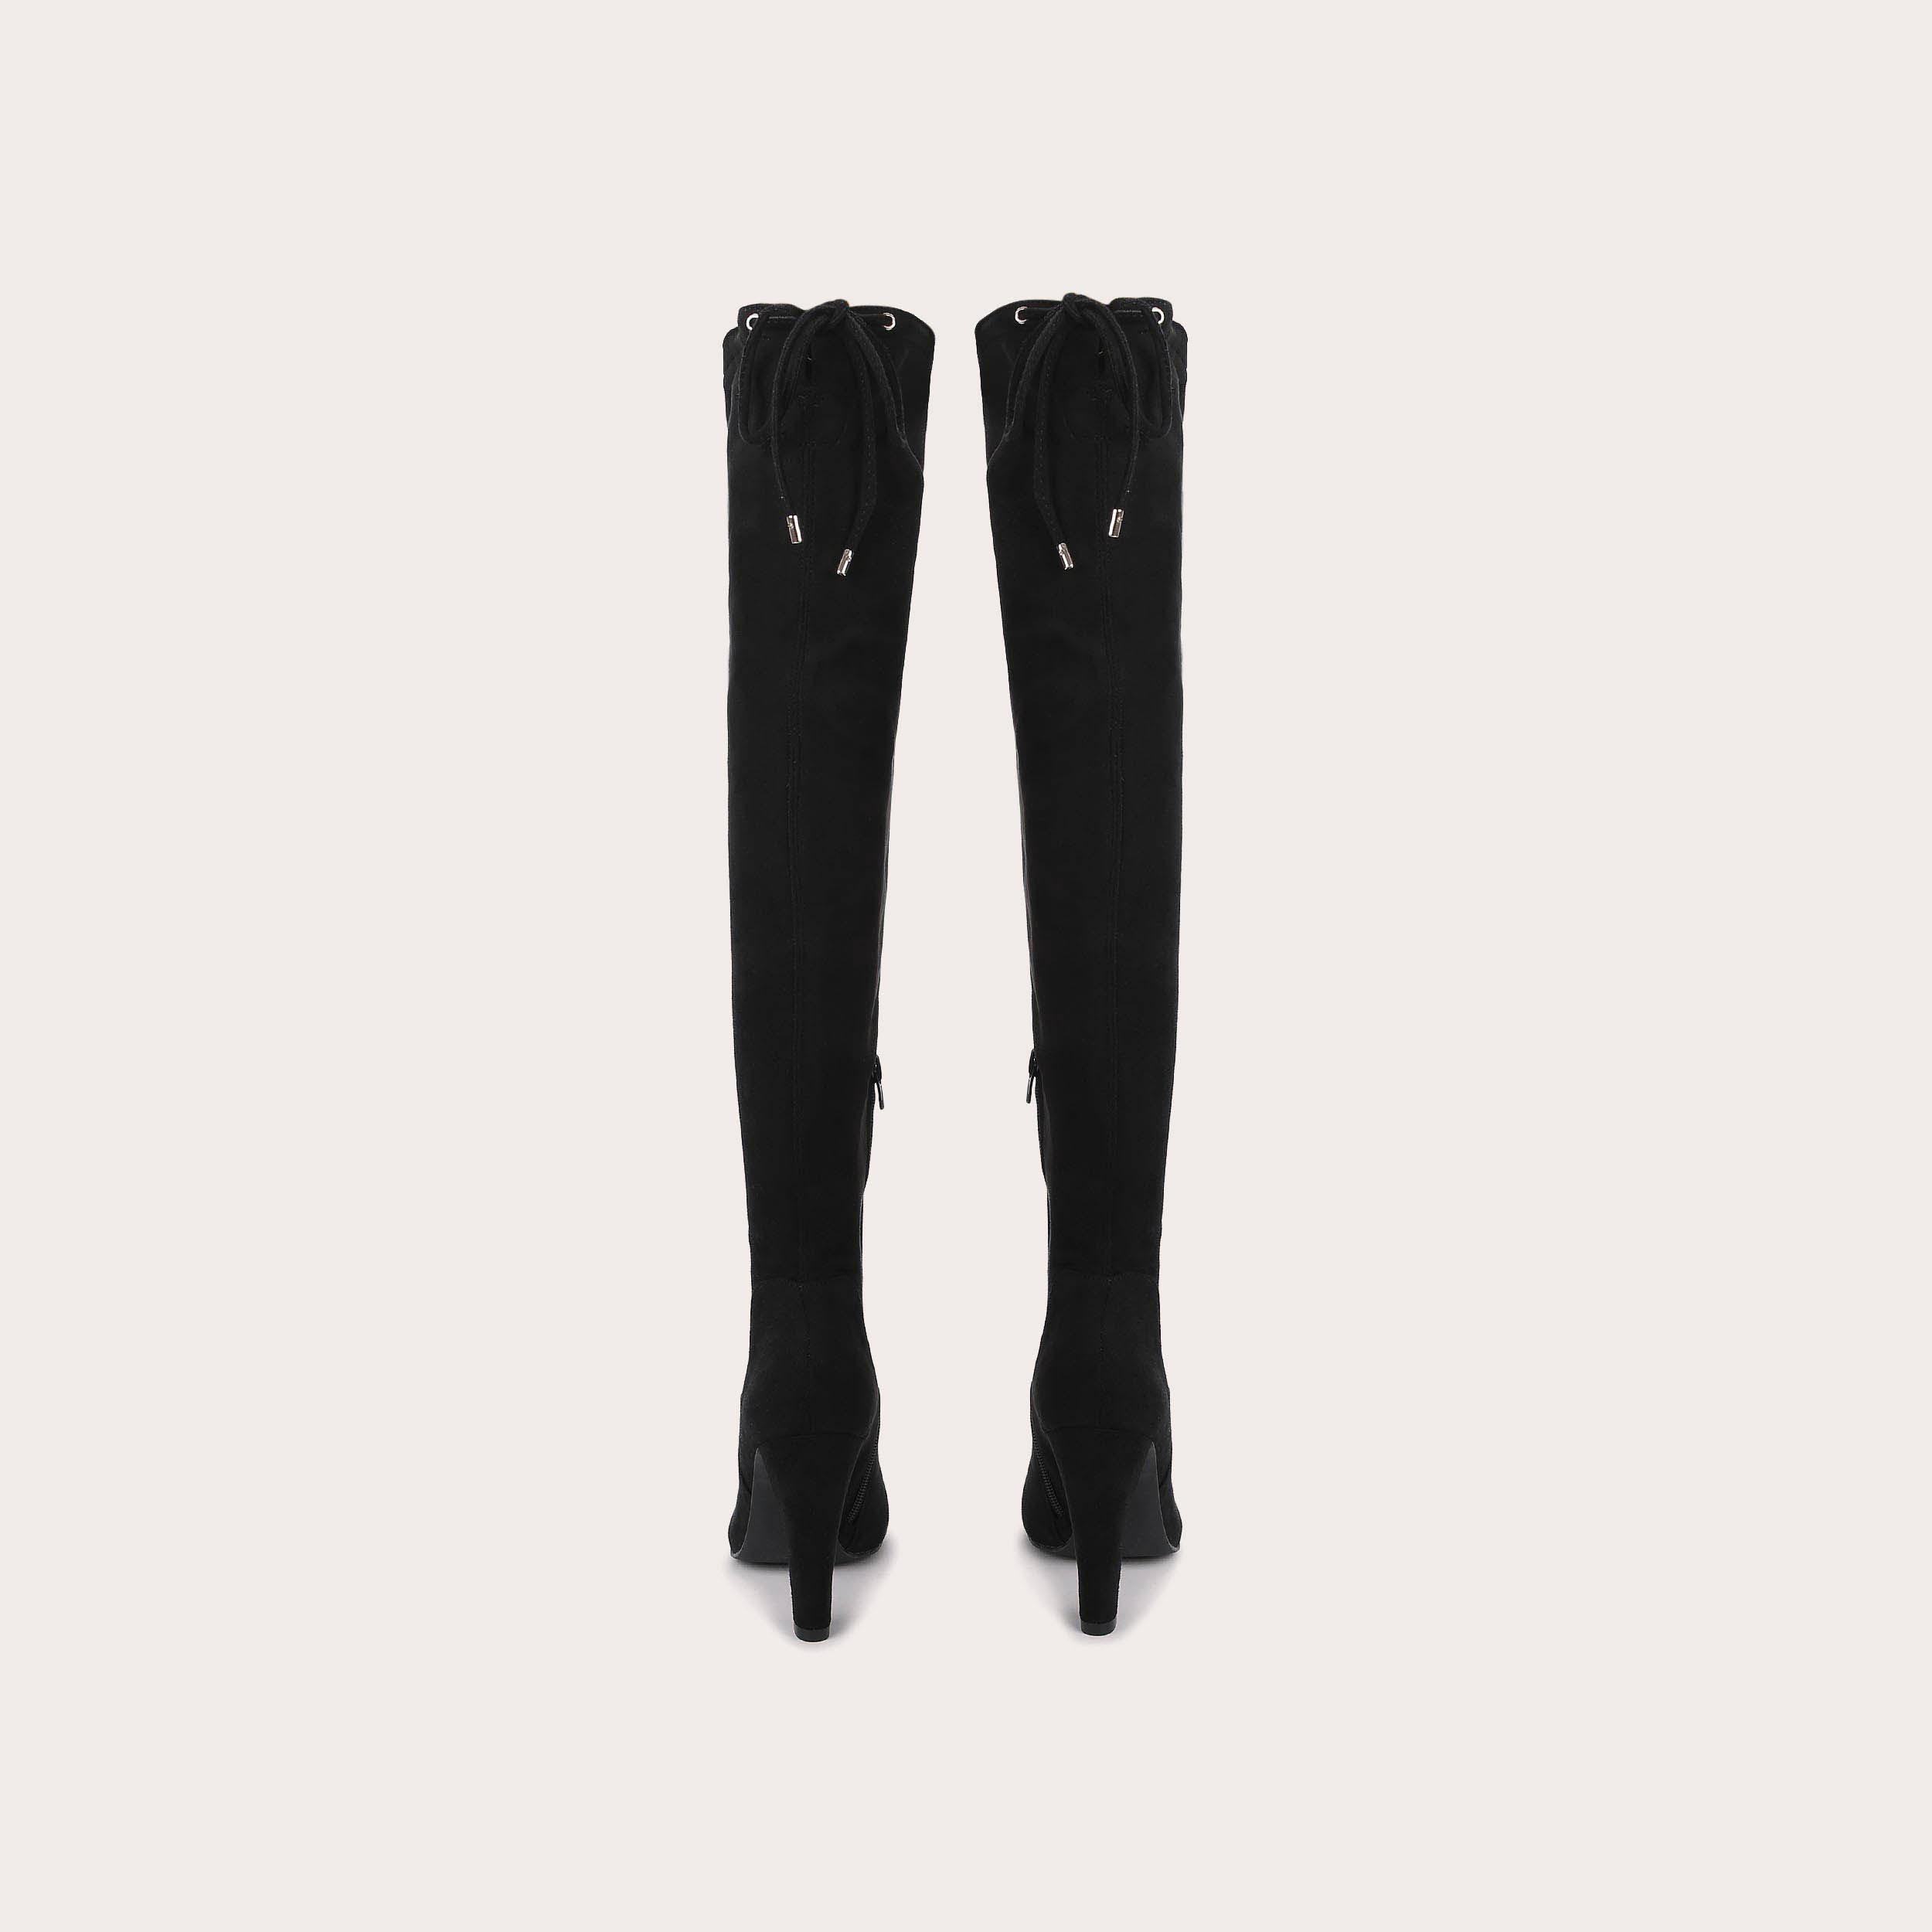 PAMMY Black High Heel Over The Knee Boots by CARVELA